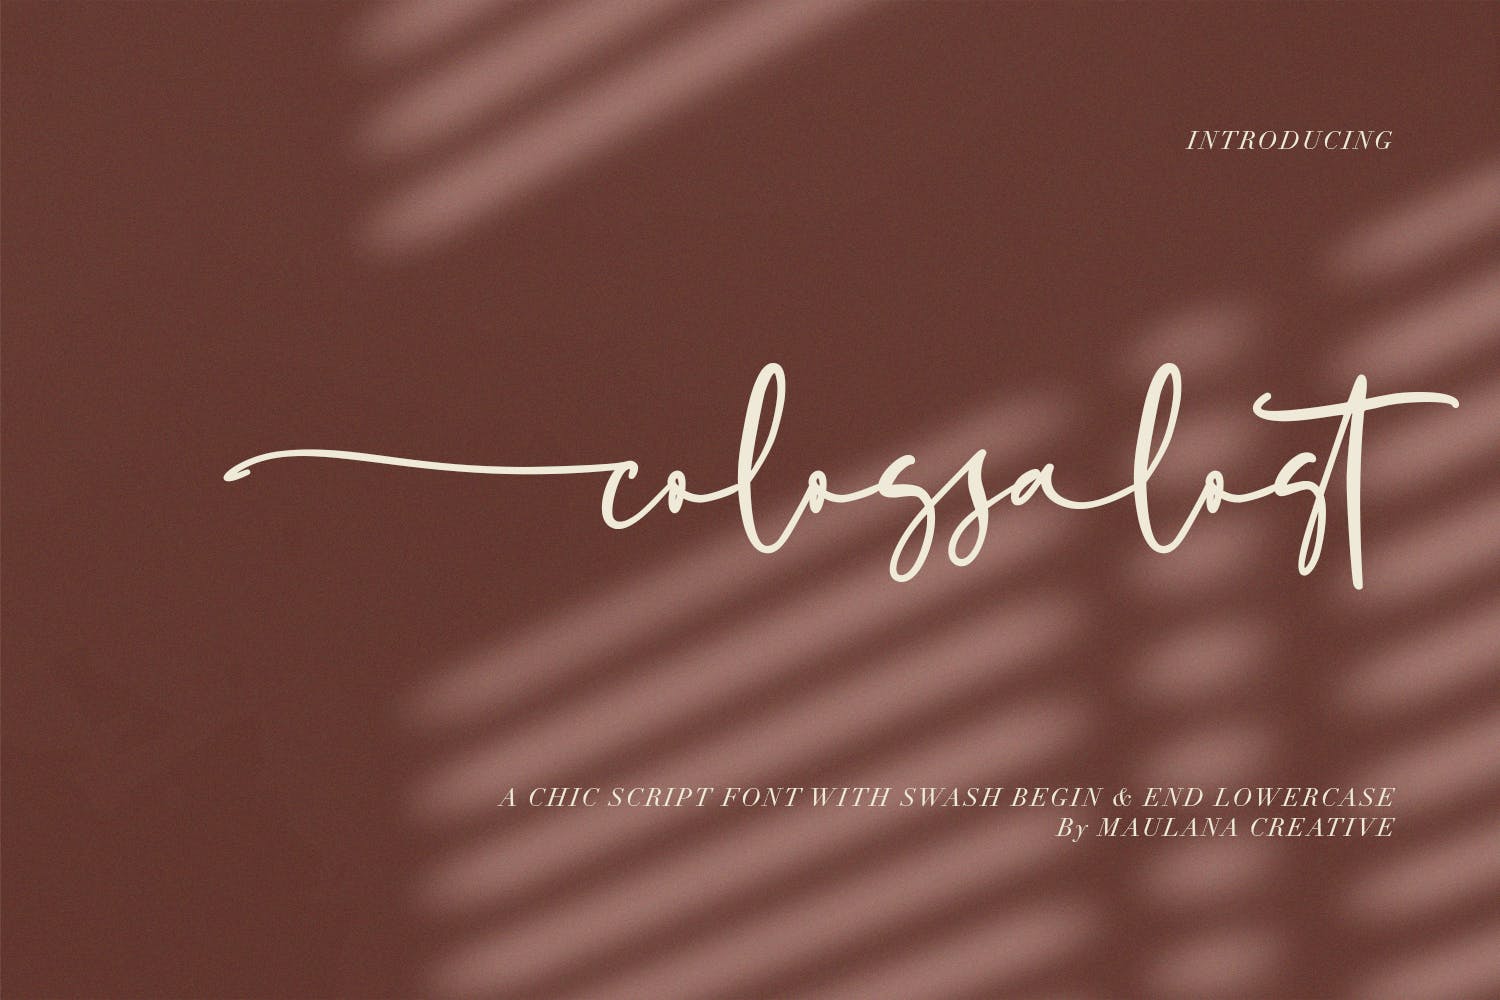 A chick script font with swash